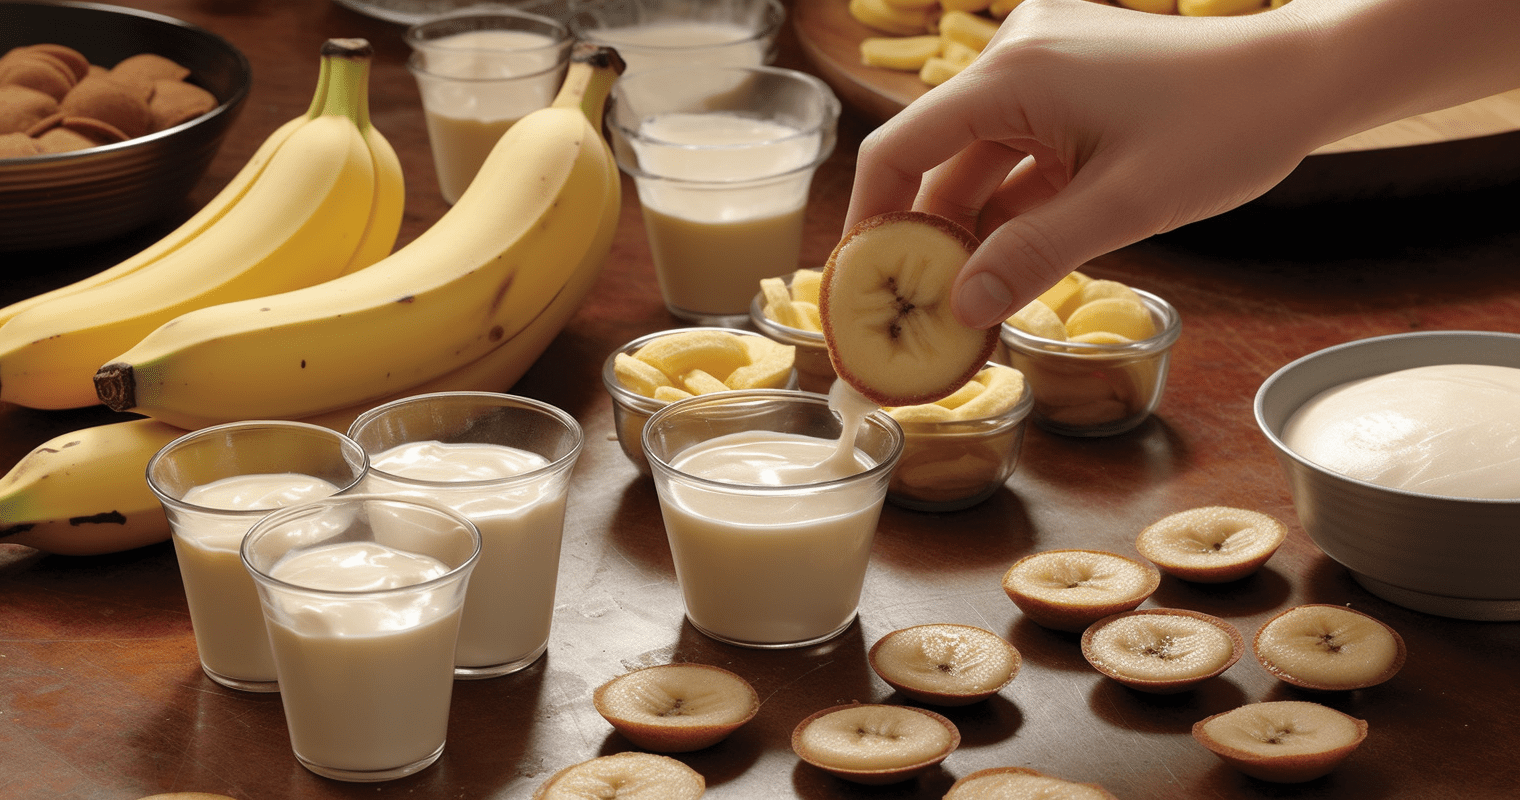 Banana Pudding Cups Cooking Instructions